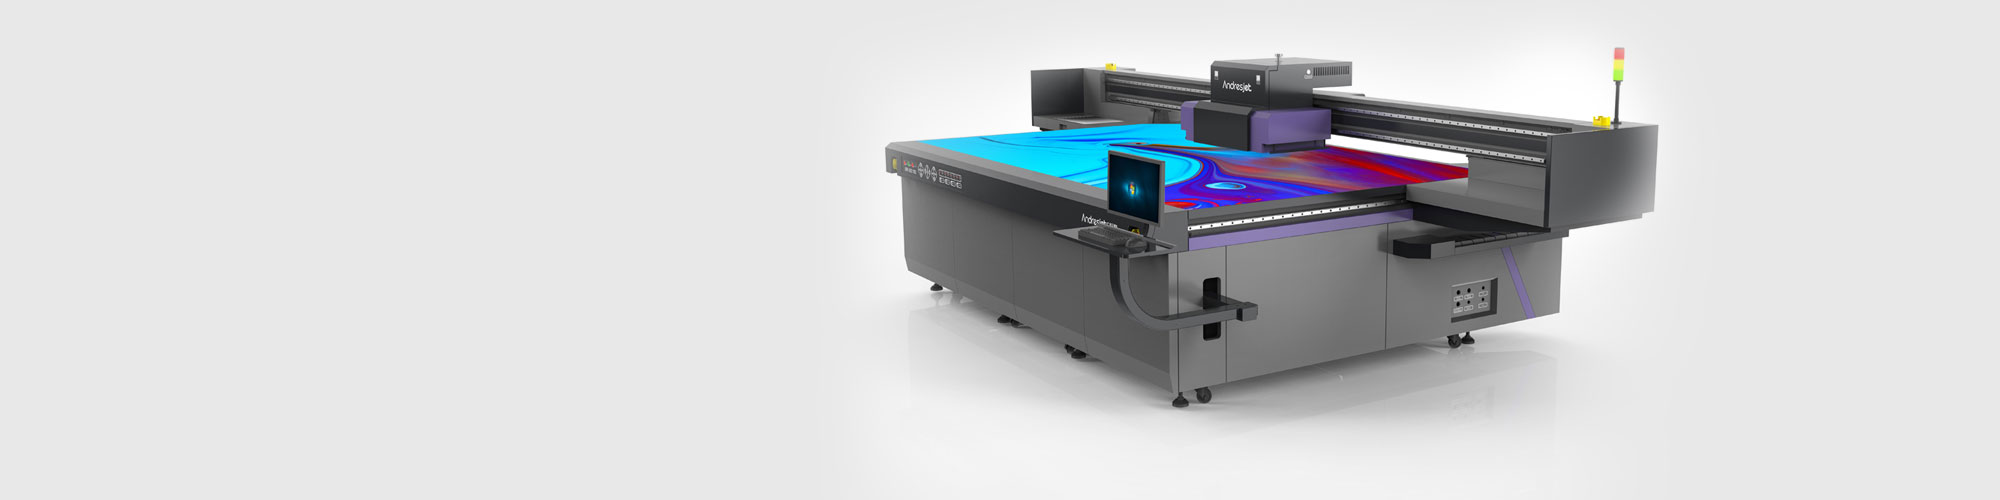 UV Flatbed Printer: Innovations in Printing Technology